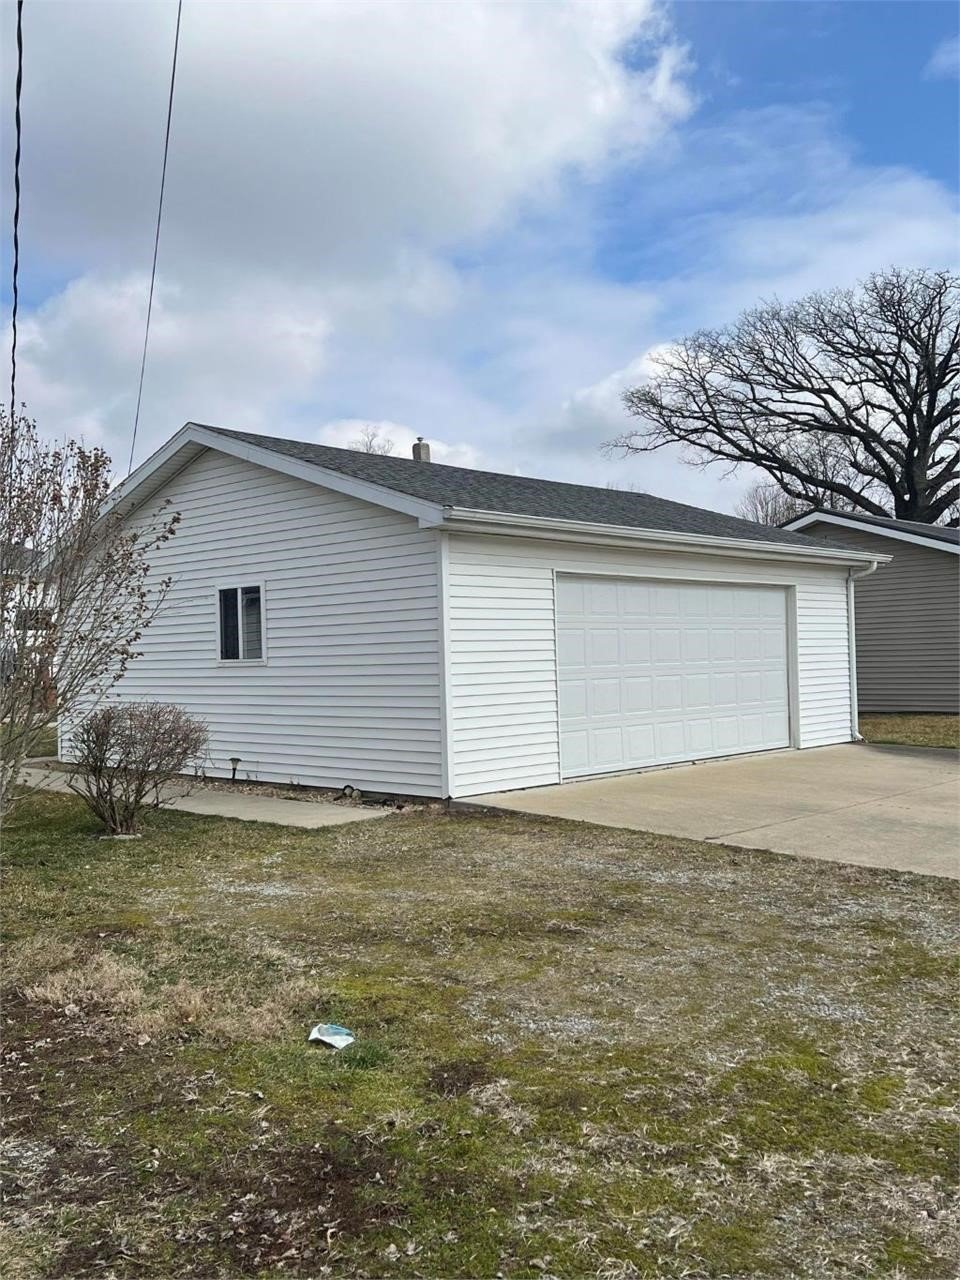 3 Bedroom Home in Auburn, Indiana ~ No Reserve Auction